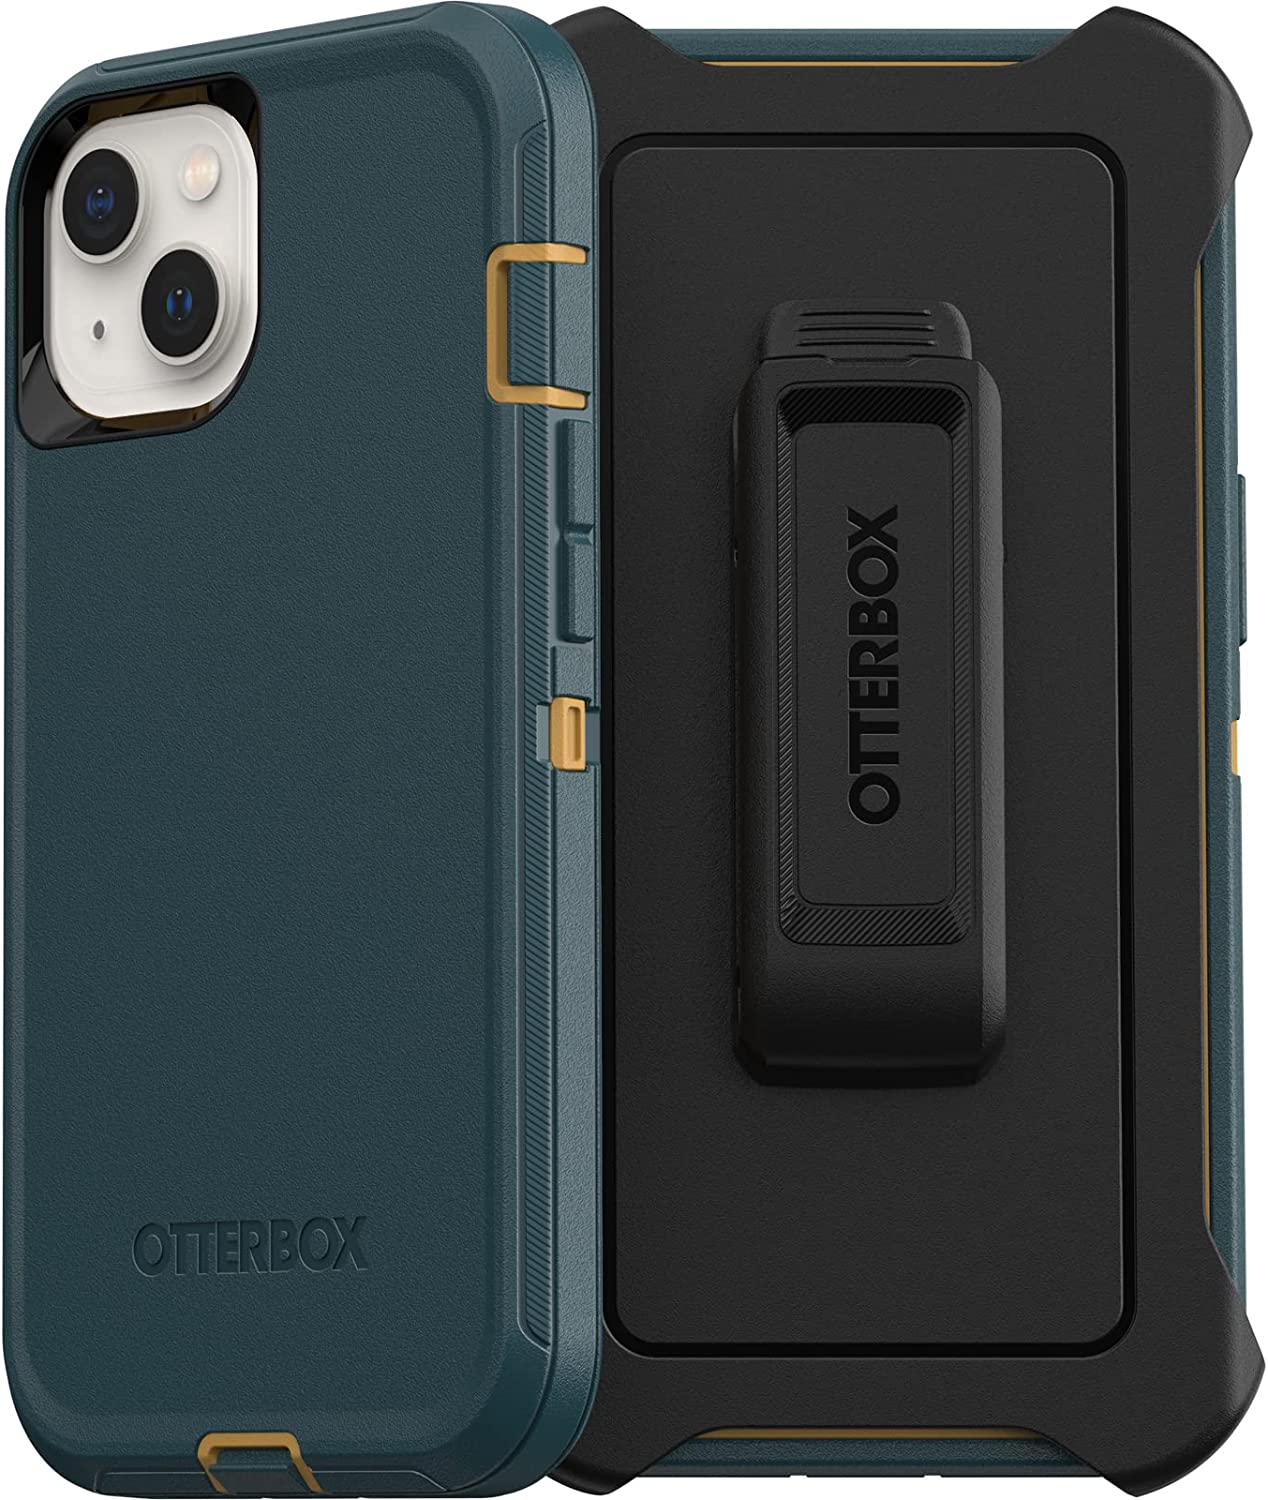 OtterBox DEFENDER SERIES Case for Apple iPhone 13 - Hunter Green (New)